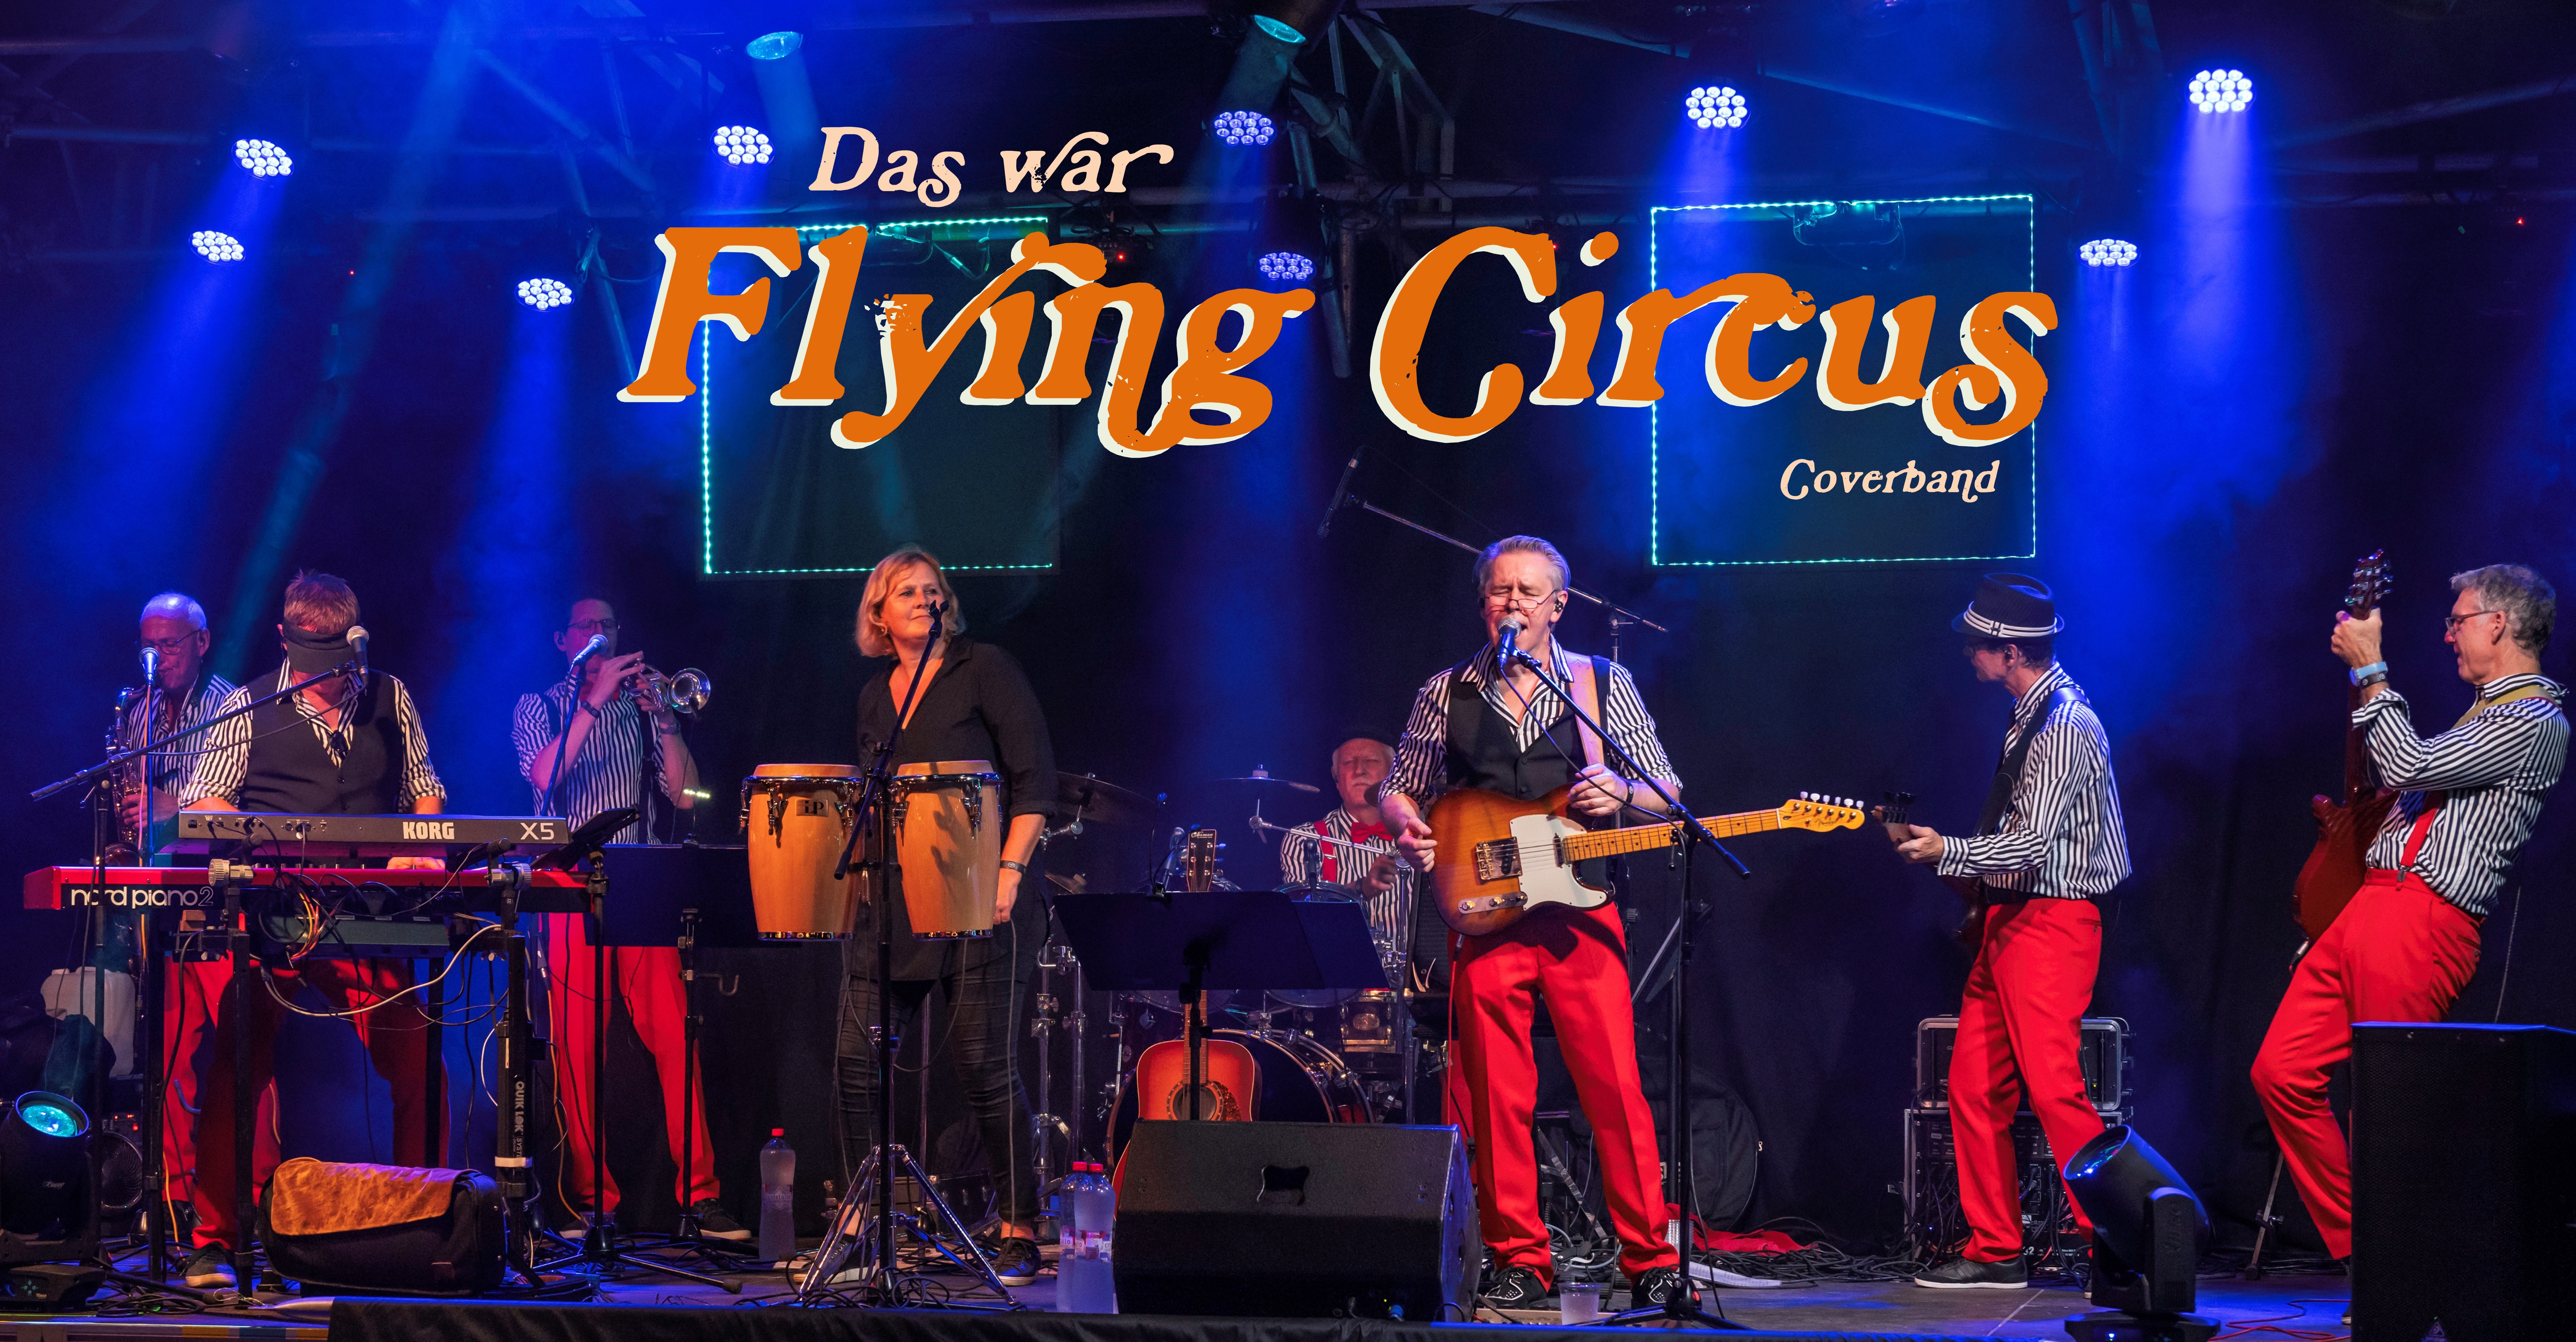 A collage of the Flying Circus cover band performing live